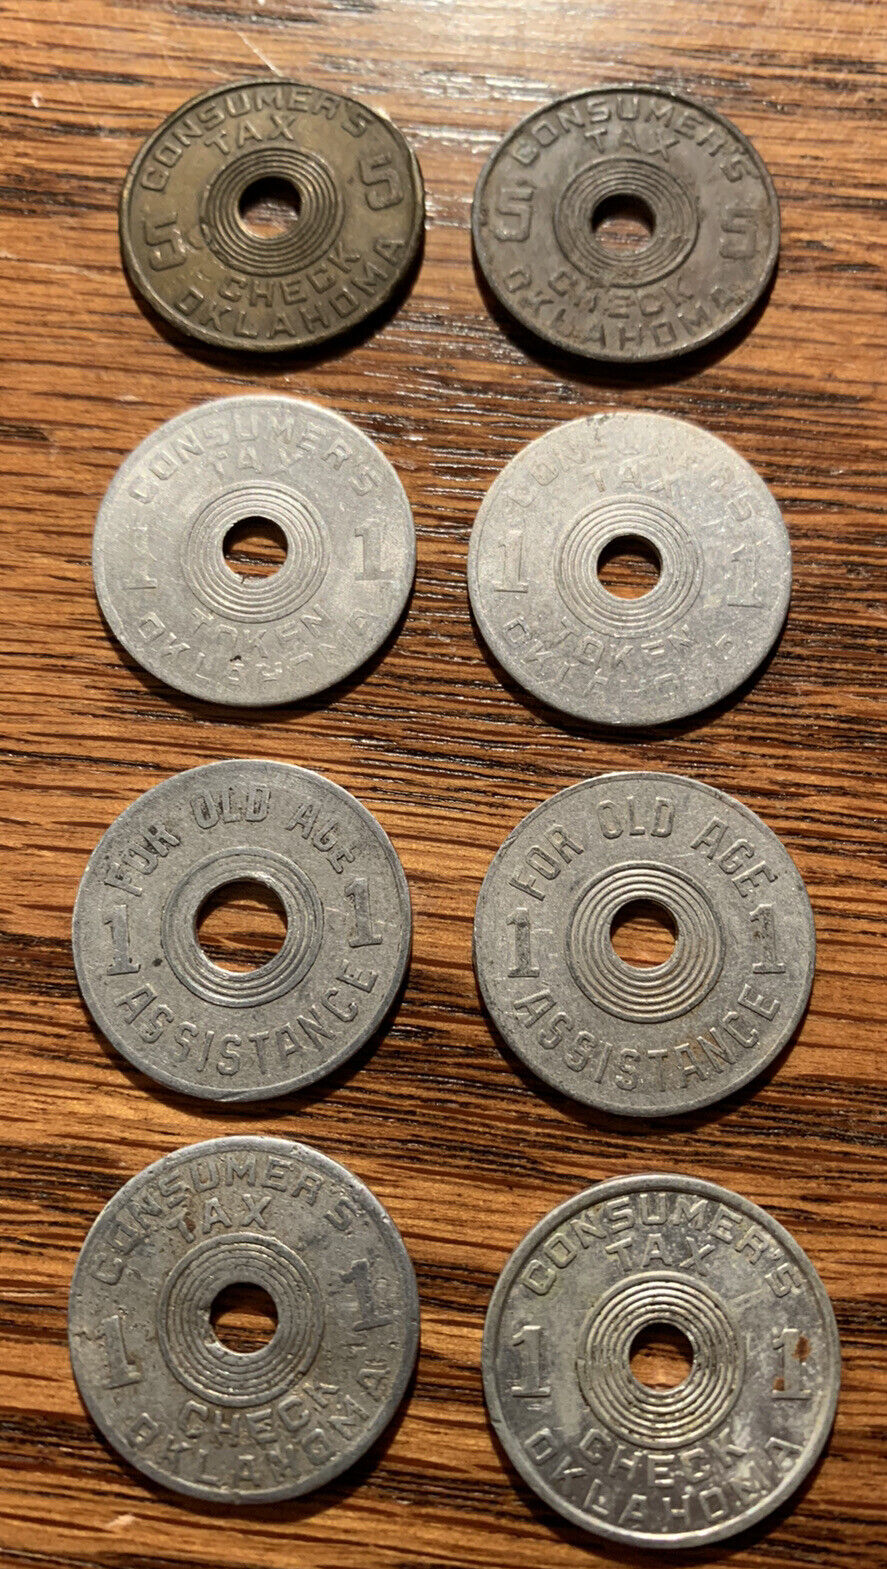 Oklahoma Consumer Tax Tokens 5 Cent Brasstone Metal Coin & Old Age Tokens 1 Cent